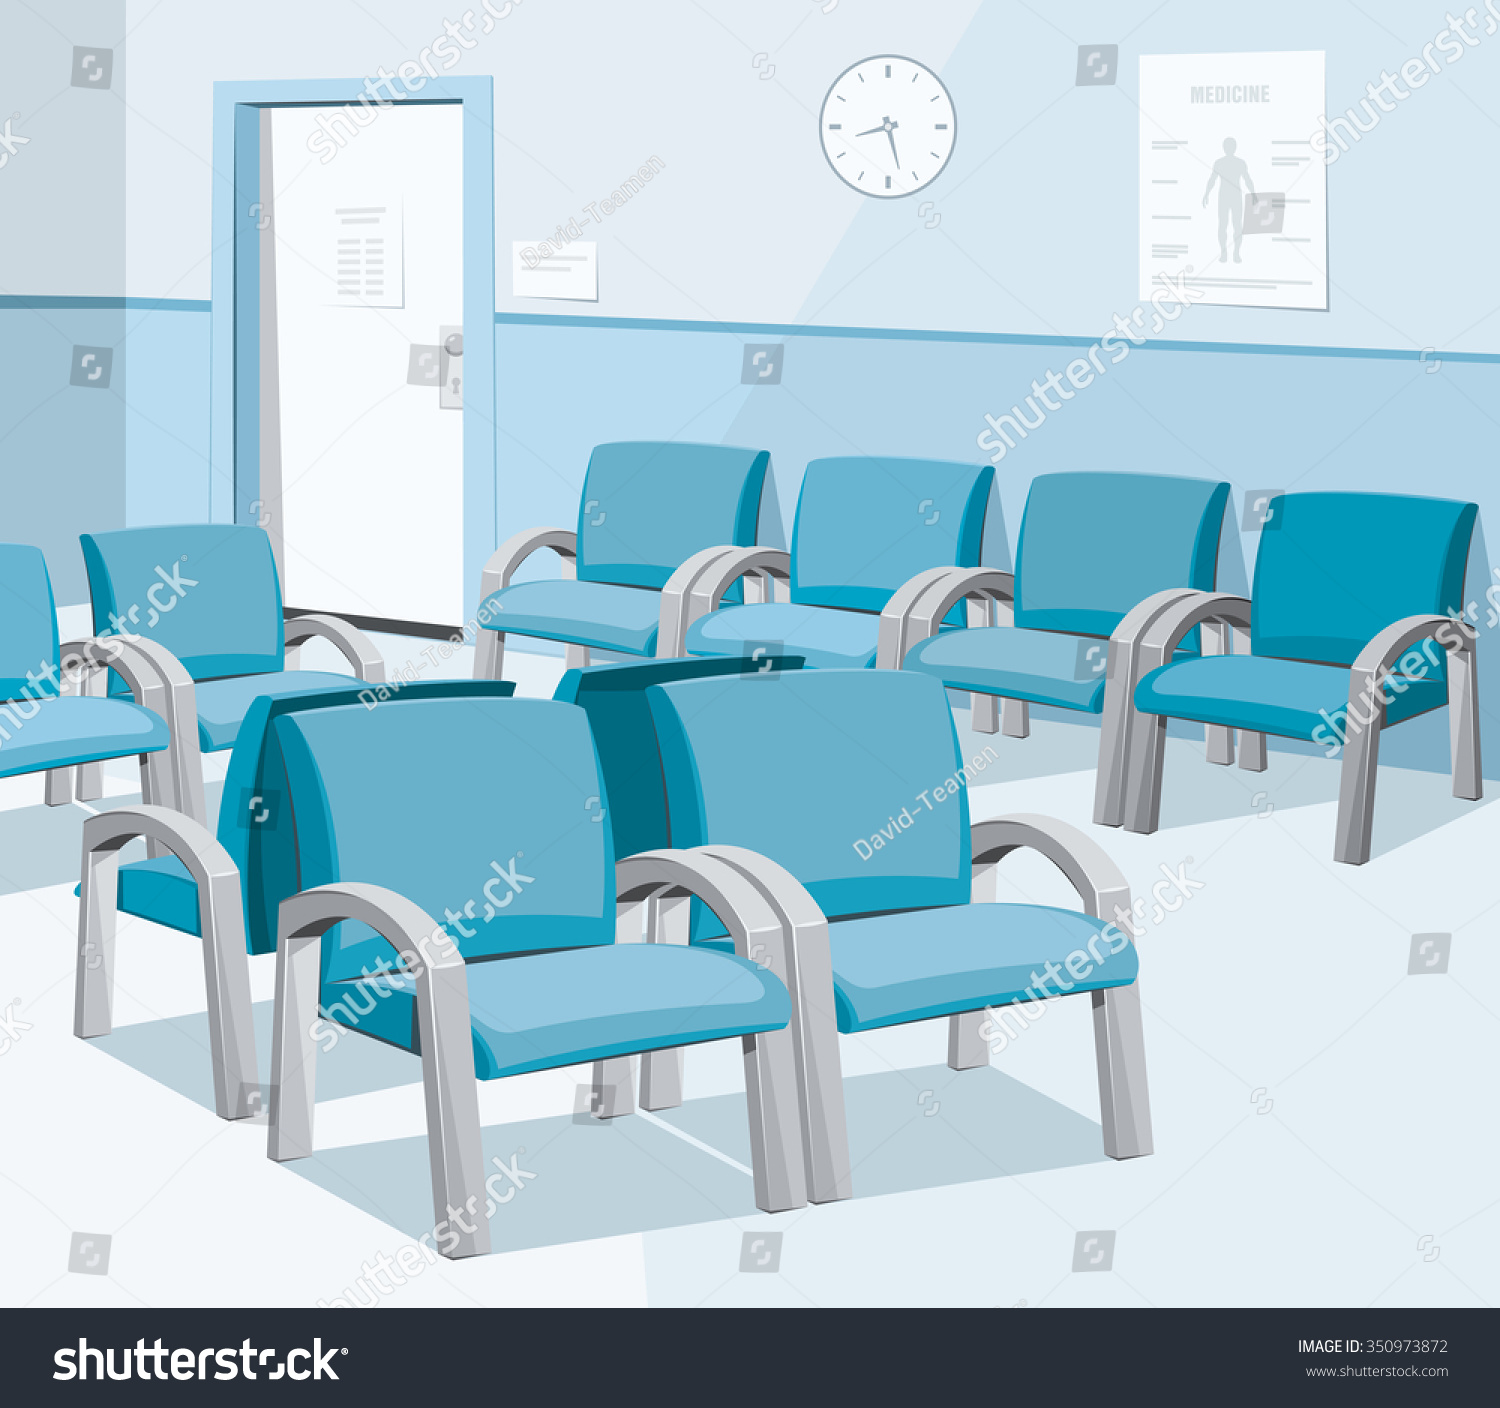 clipart waiting room - photo #31